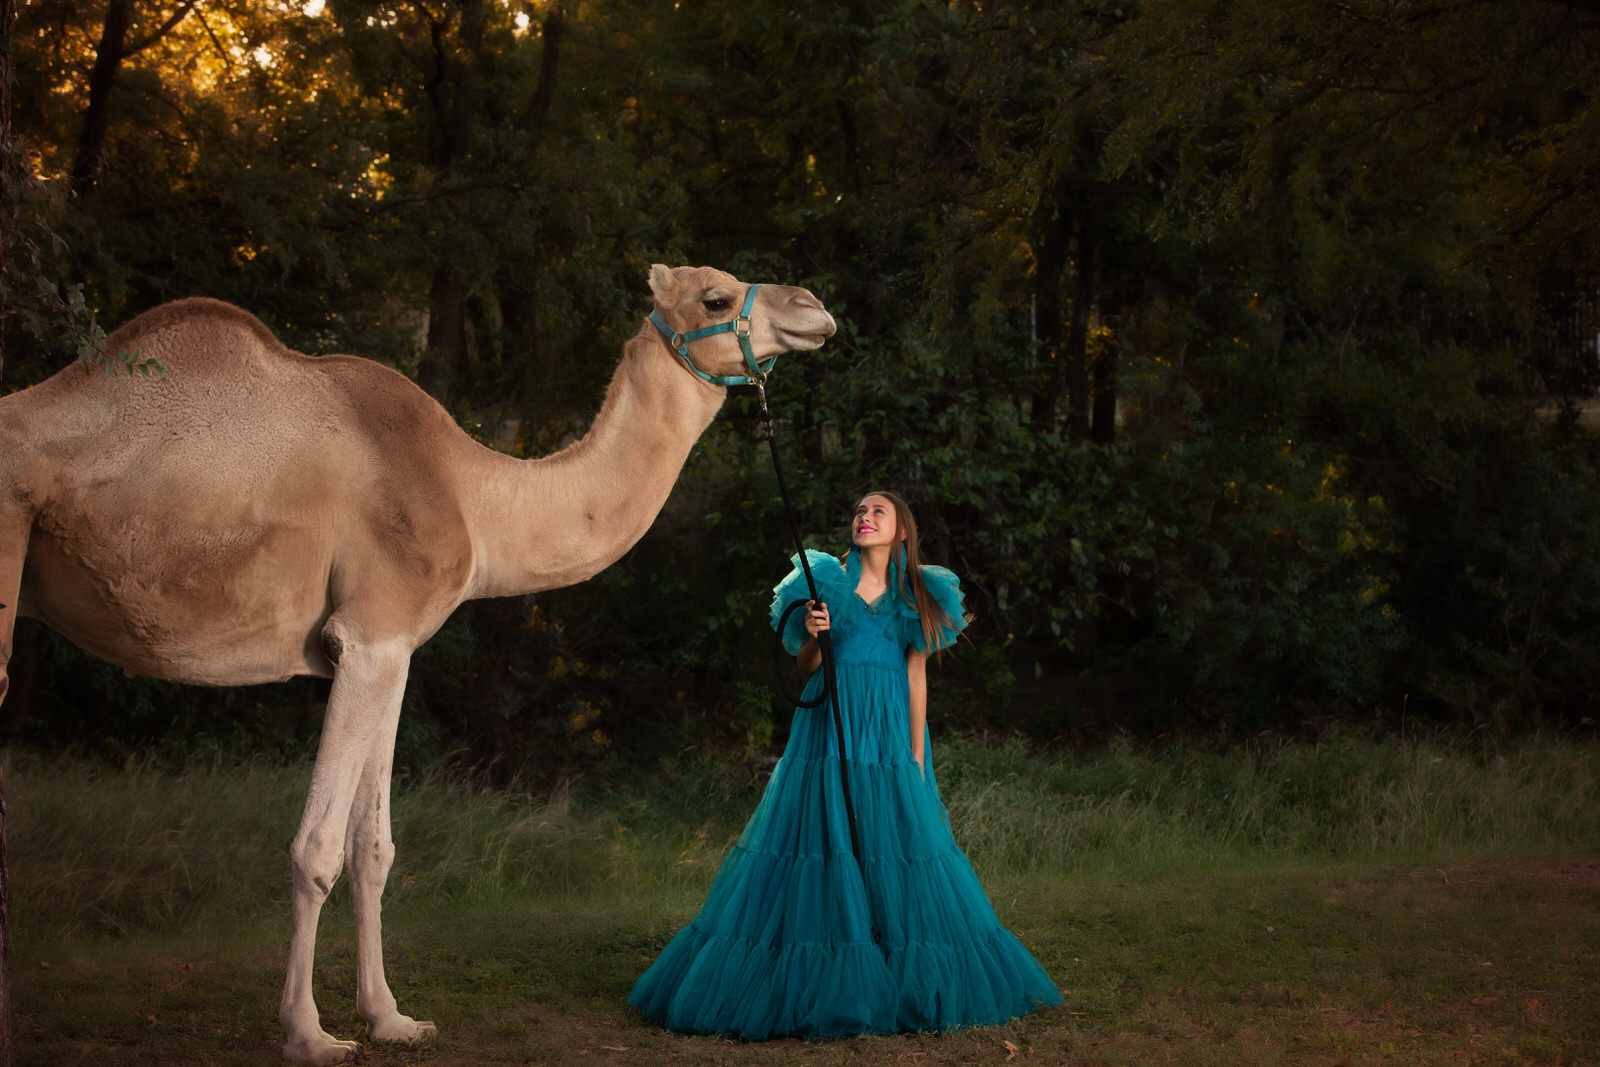 A teenage girl in a blue gown stands in a path walking a camel on a leash things to do in midlothian tx fine are princess photography